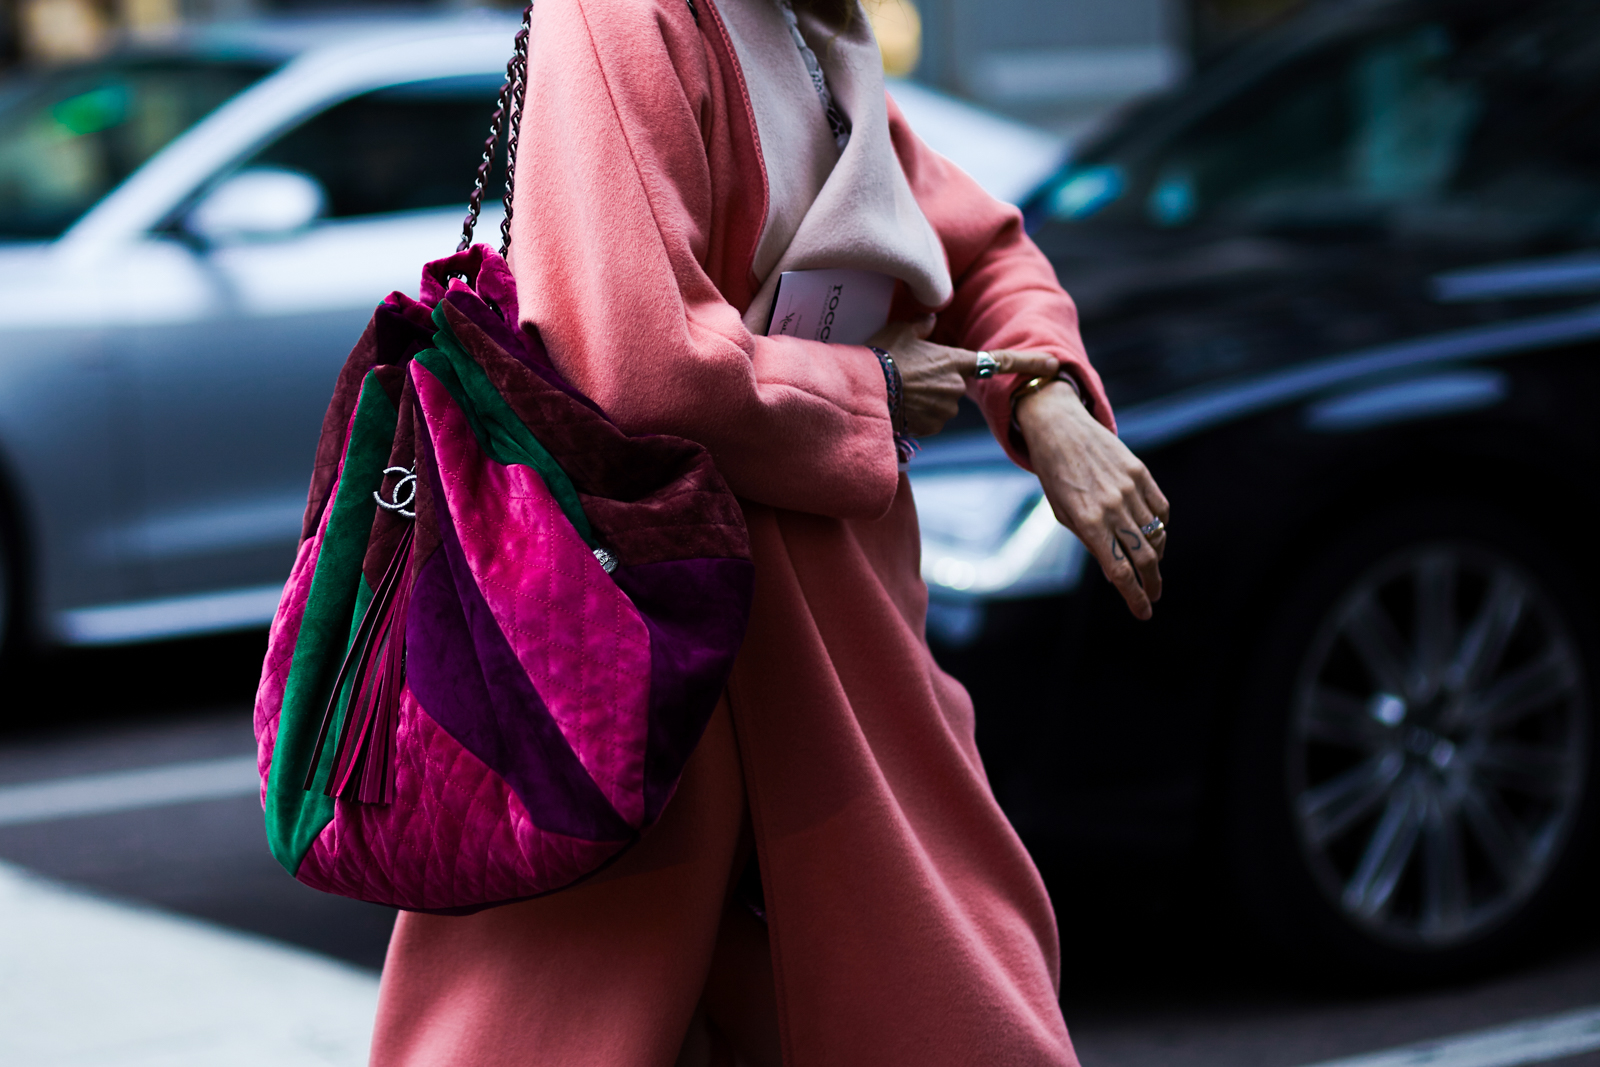 MFW Street Style: A woman wearing a pink coat and a multicolored